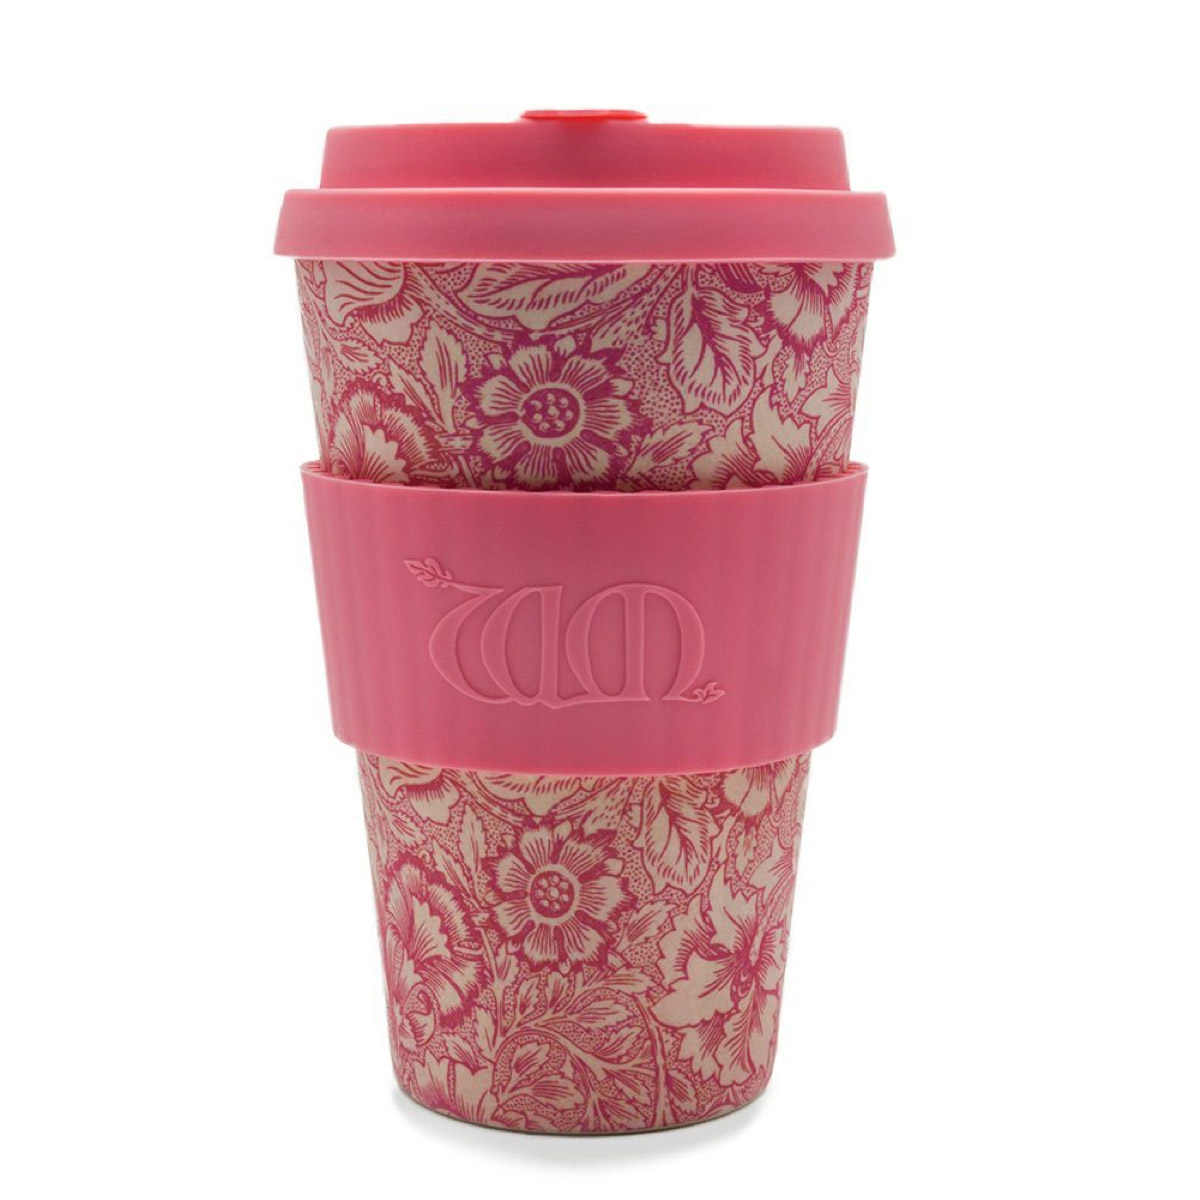 Poppy coffee cup